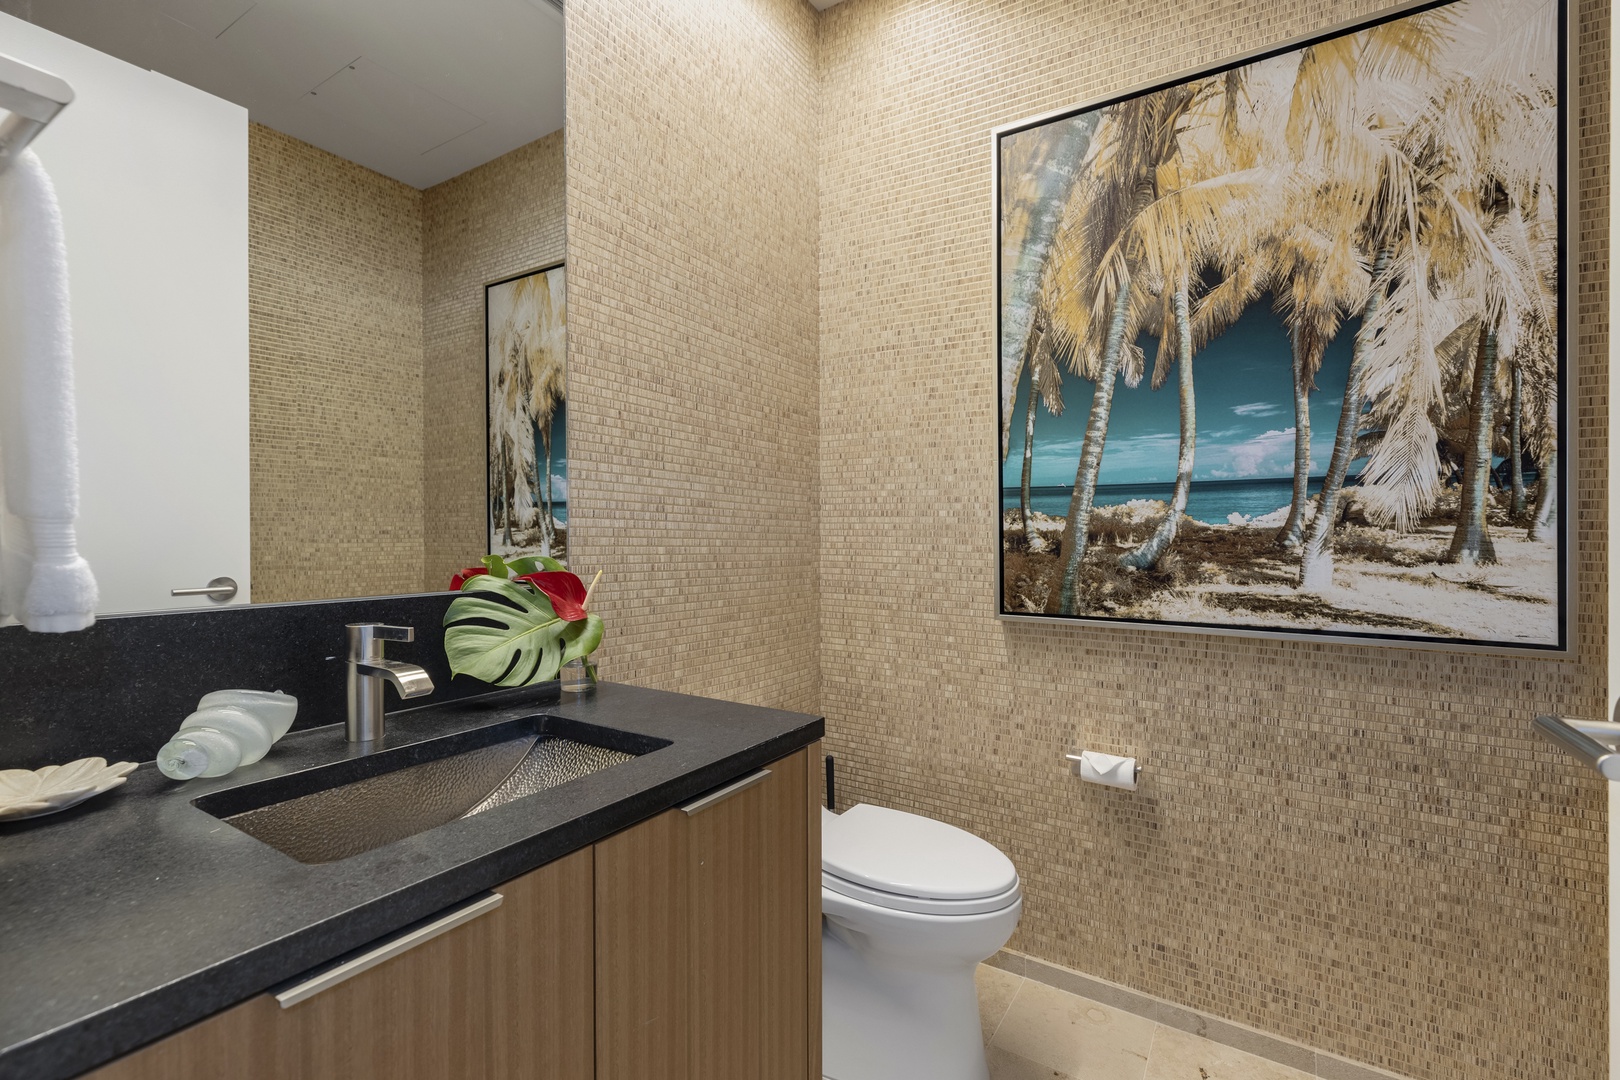 Honolulu Vacation Rentals, Park Lane Sky Resort - The half bath is accessible from the common space